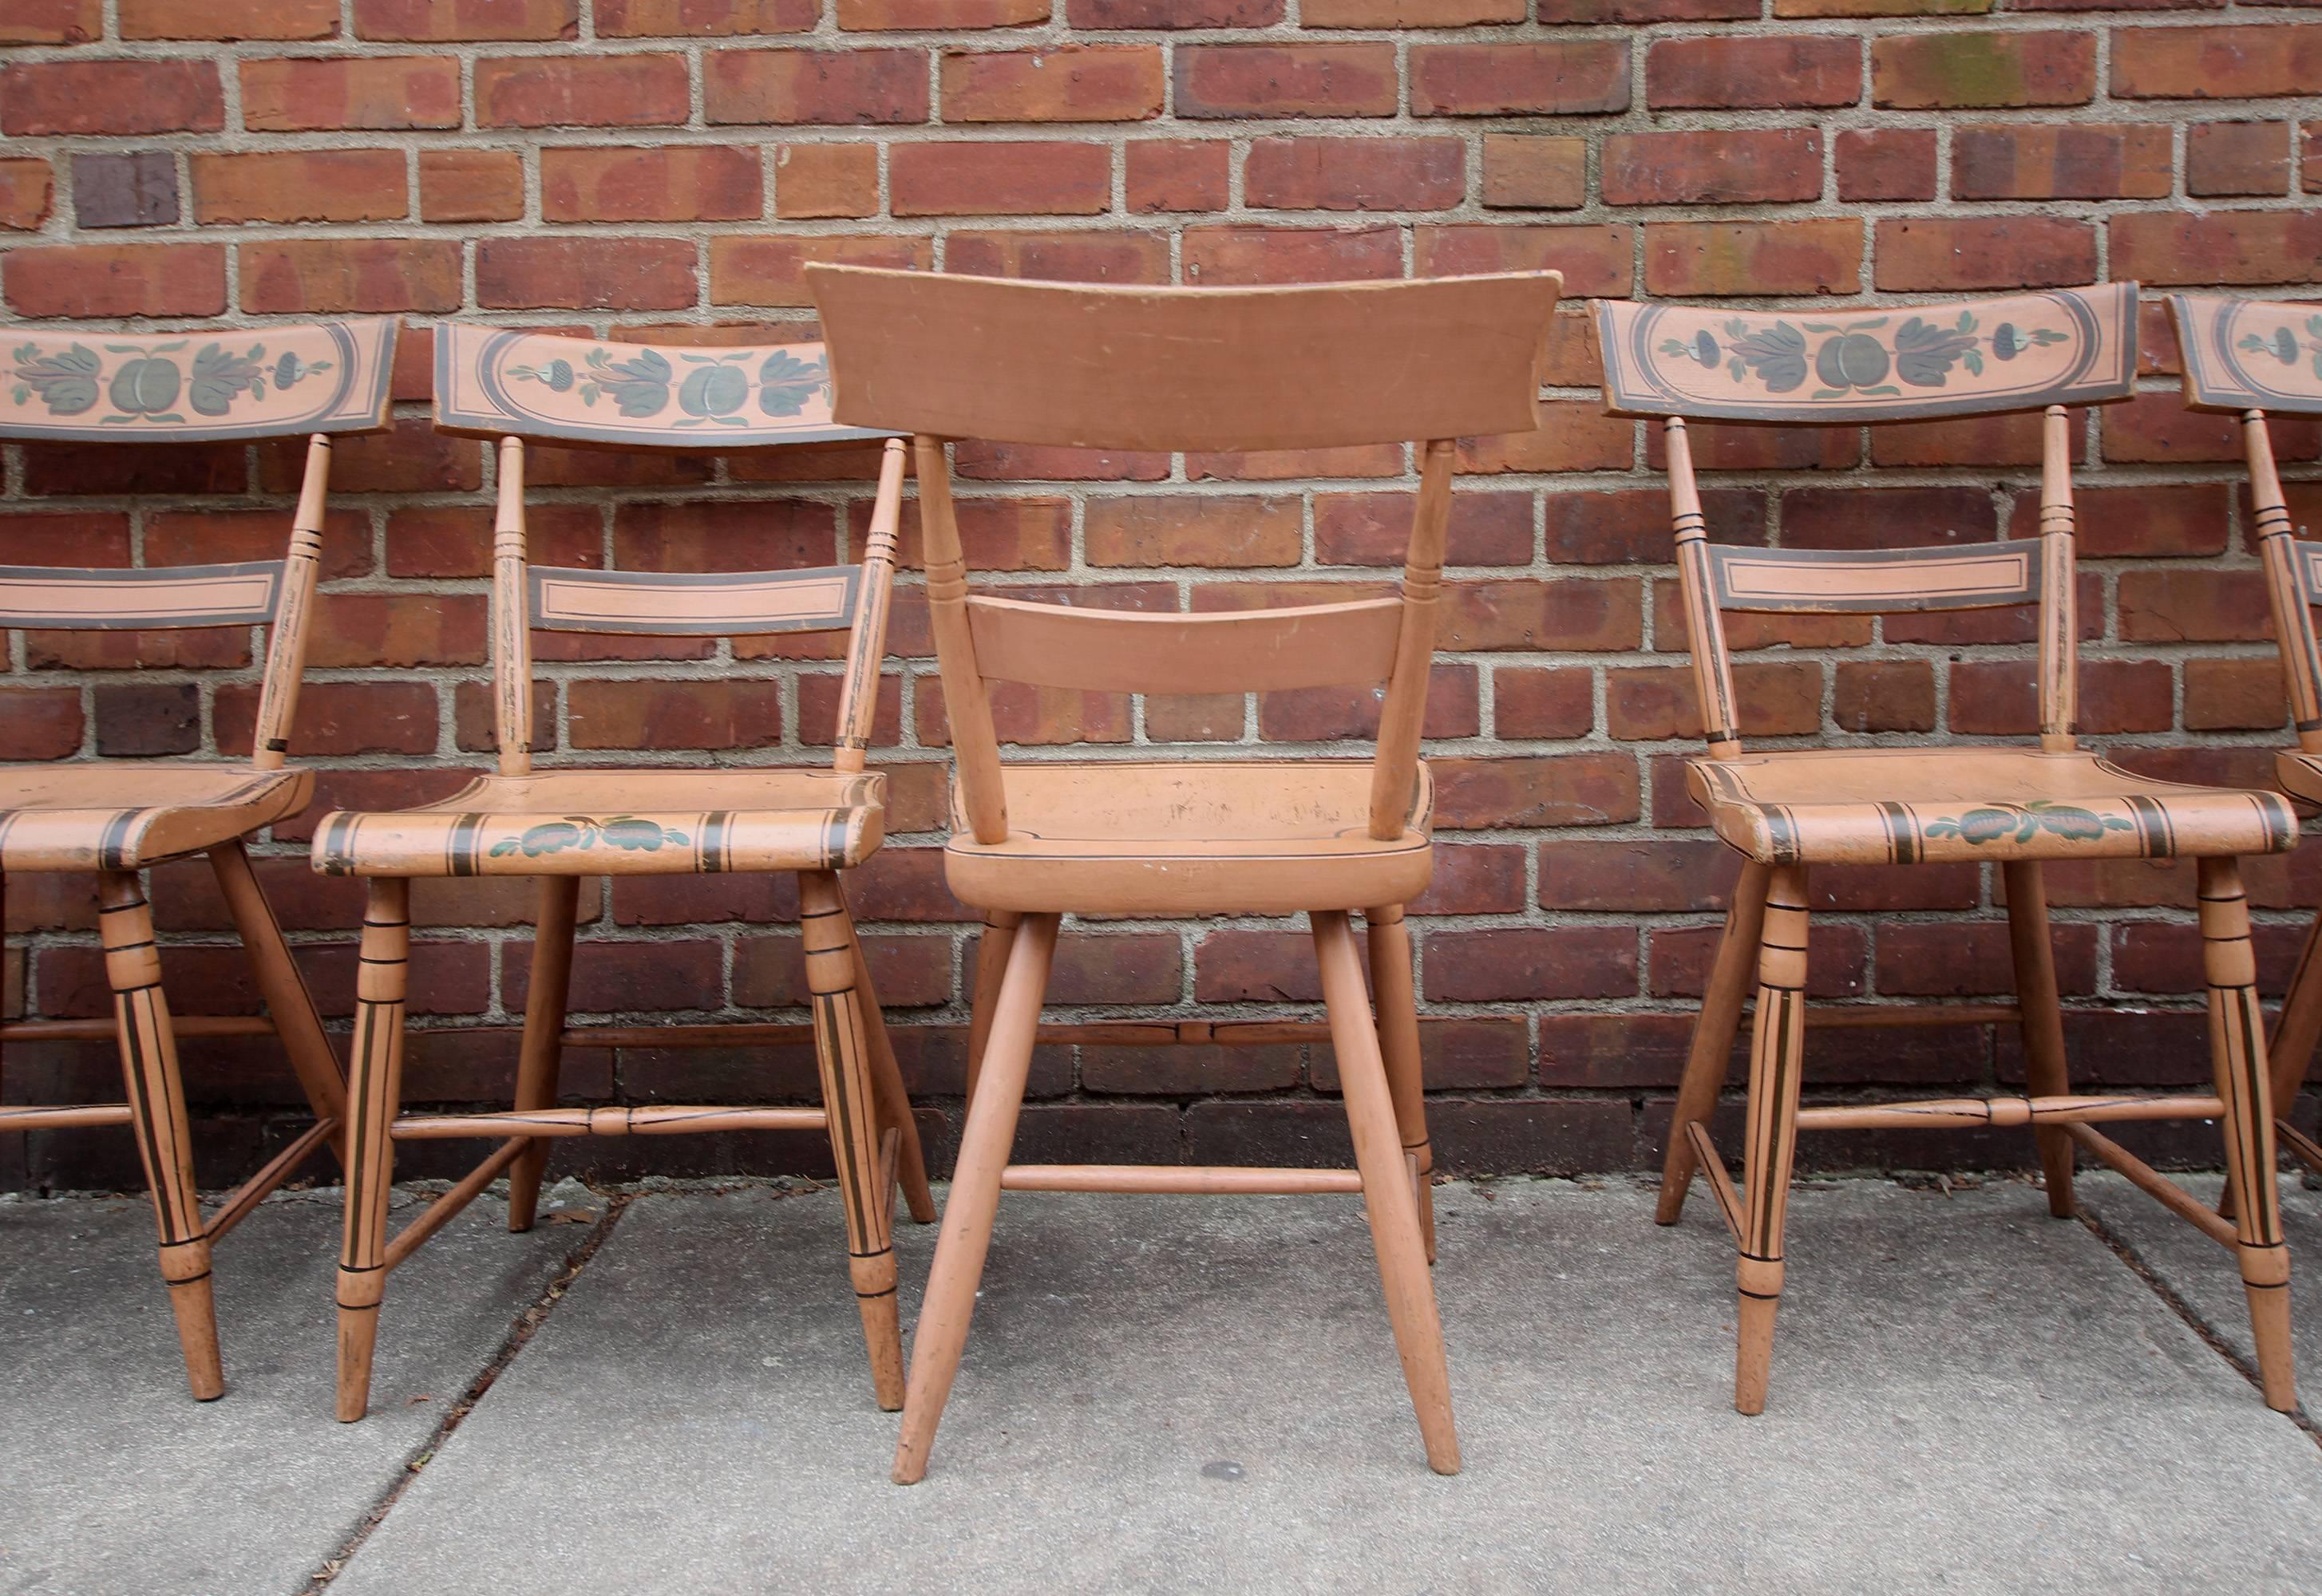 Wood Set of Six Salmon Painted and Decorated Chairs, Pennsylvania, circa 1840 For Sale